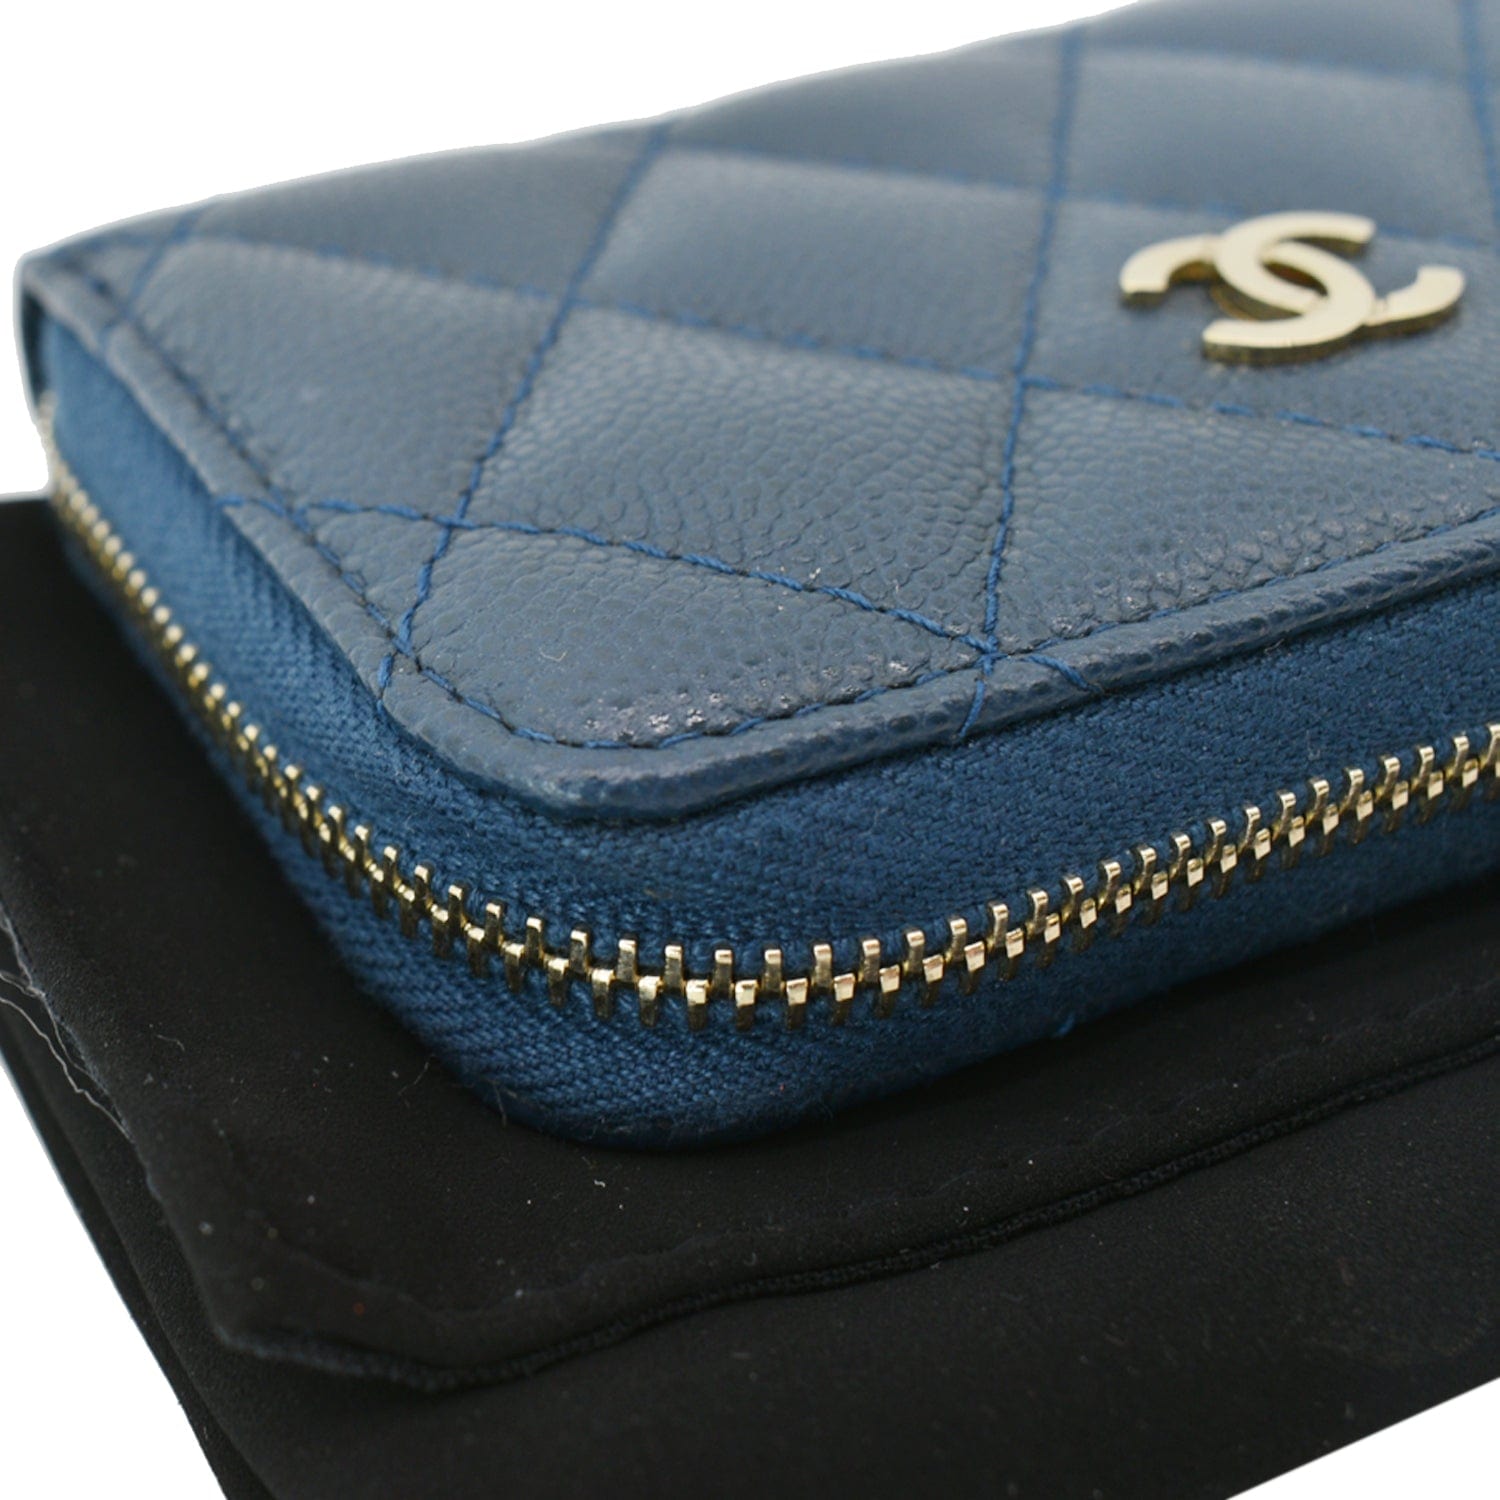 Wallets Chanel New Chanel Purse Zippered Blue Leather Quilted Blue Leather Coin Purse